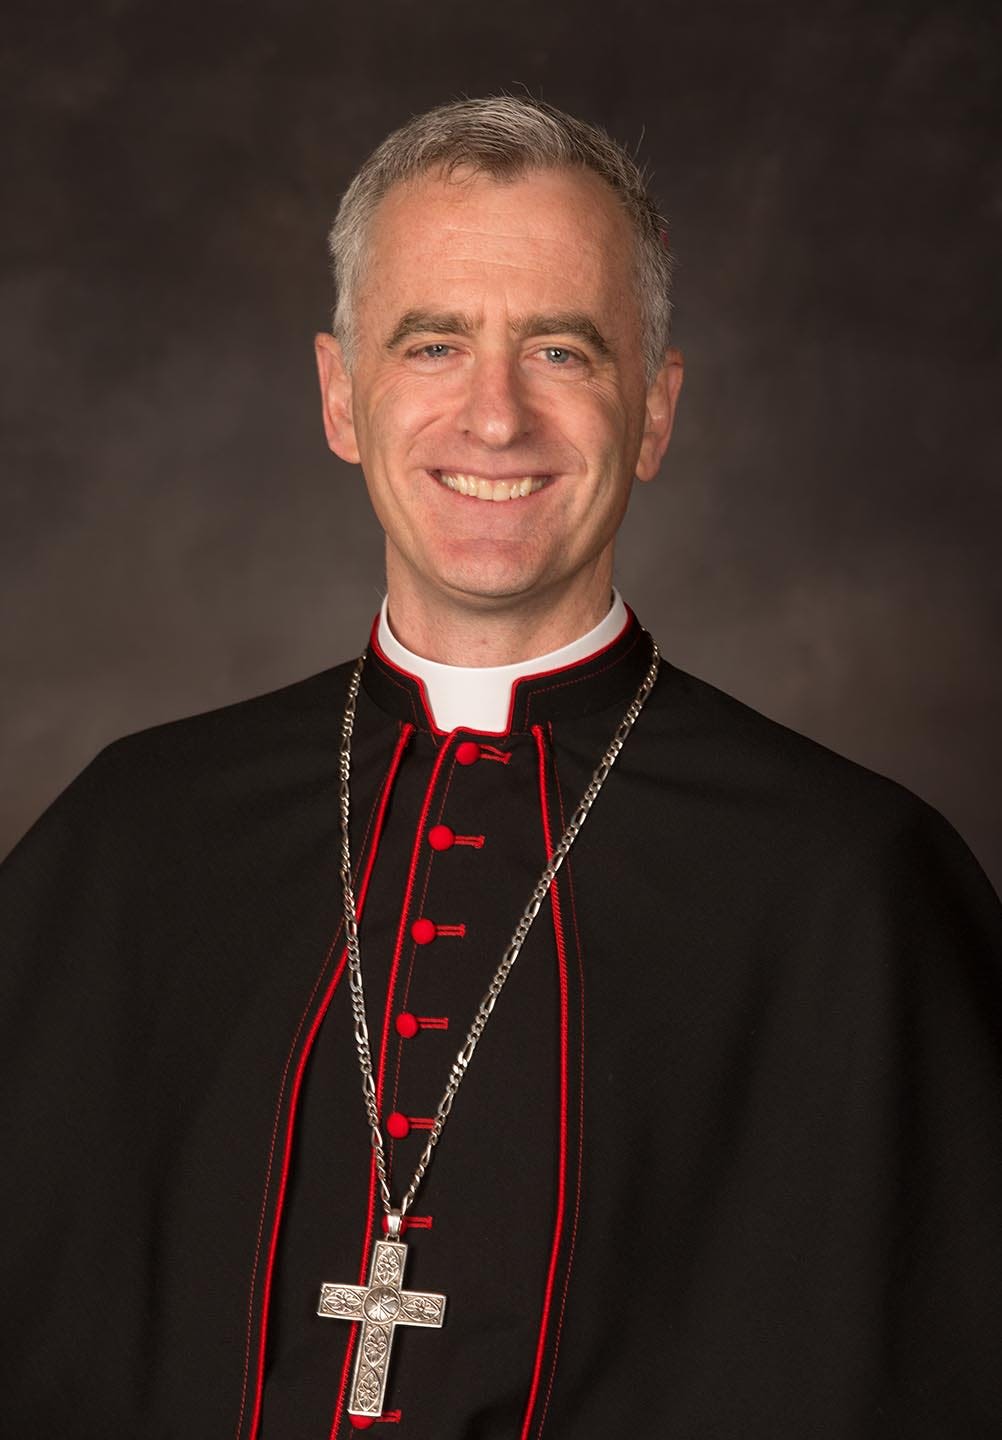 Midwestern bishop named as likely next leader of Camden diocese